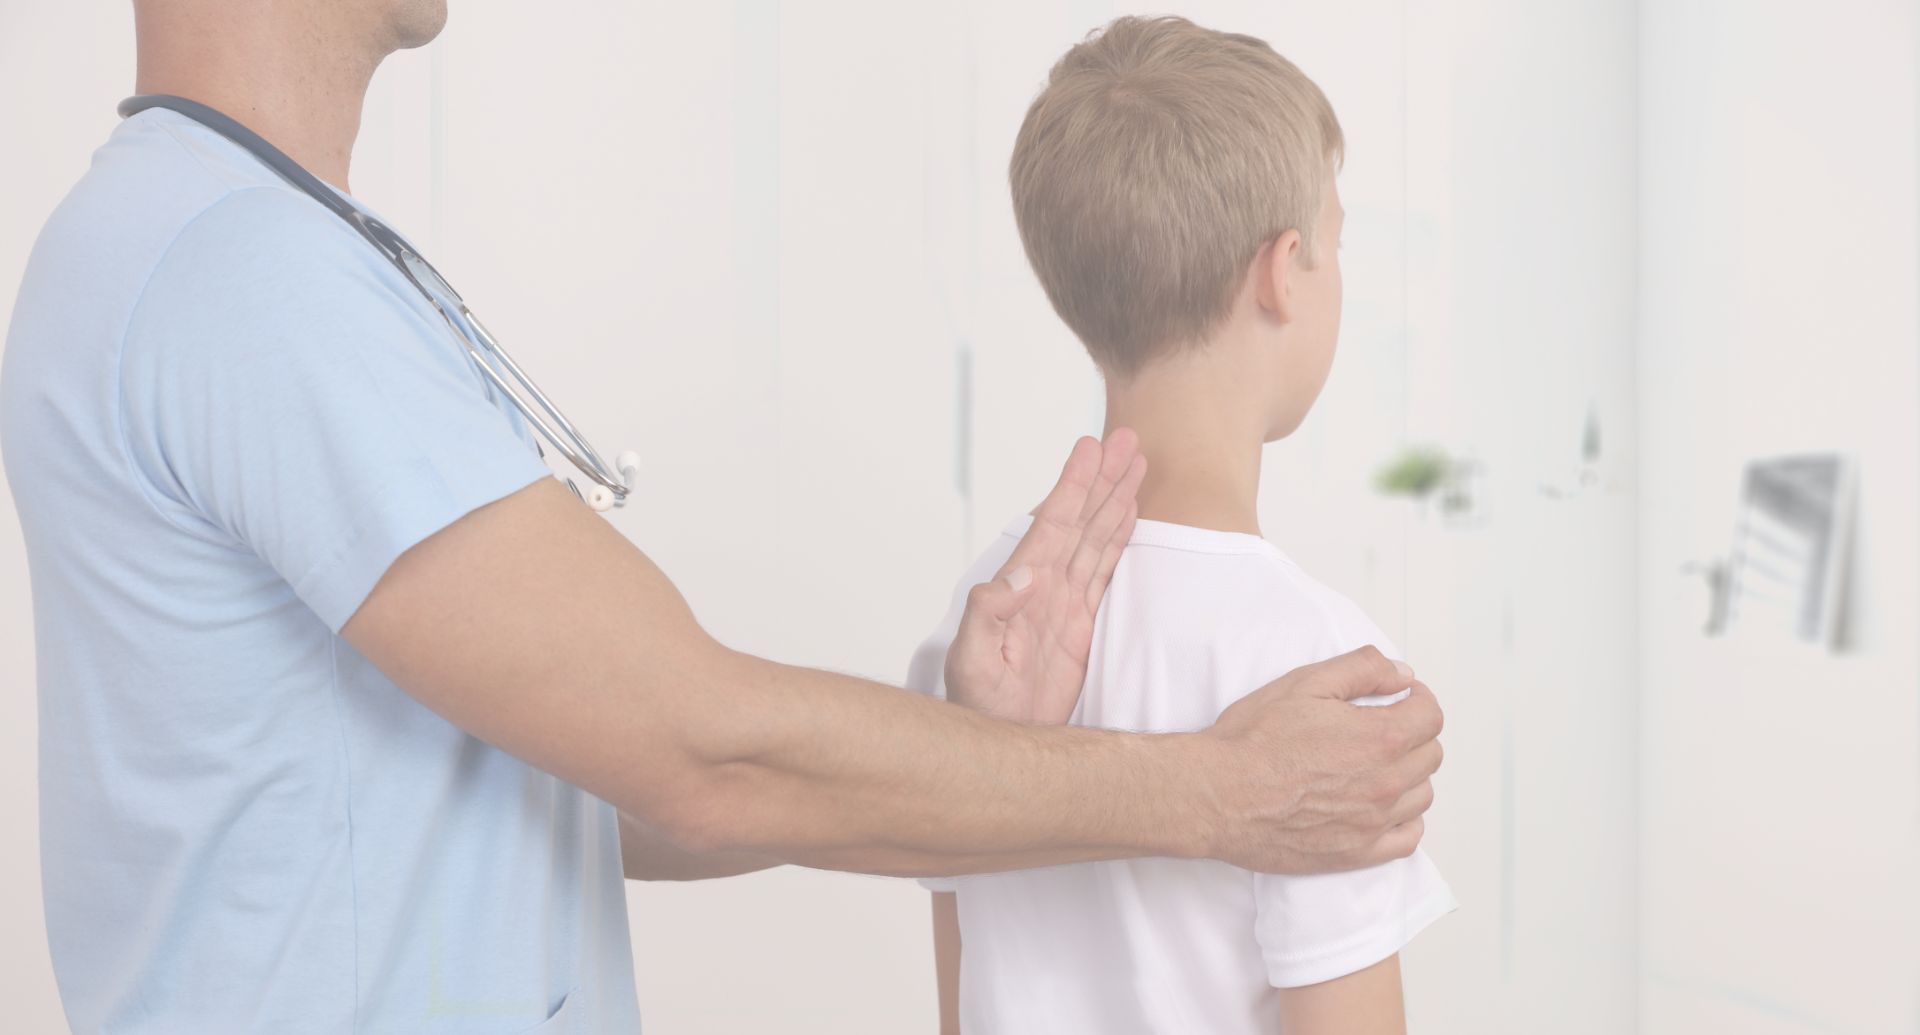 Doctor holding his hand on child's spine